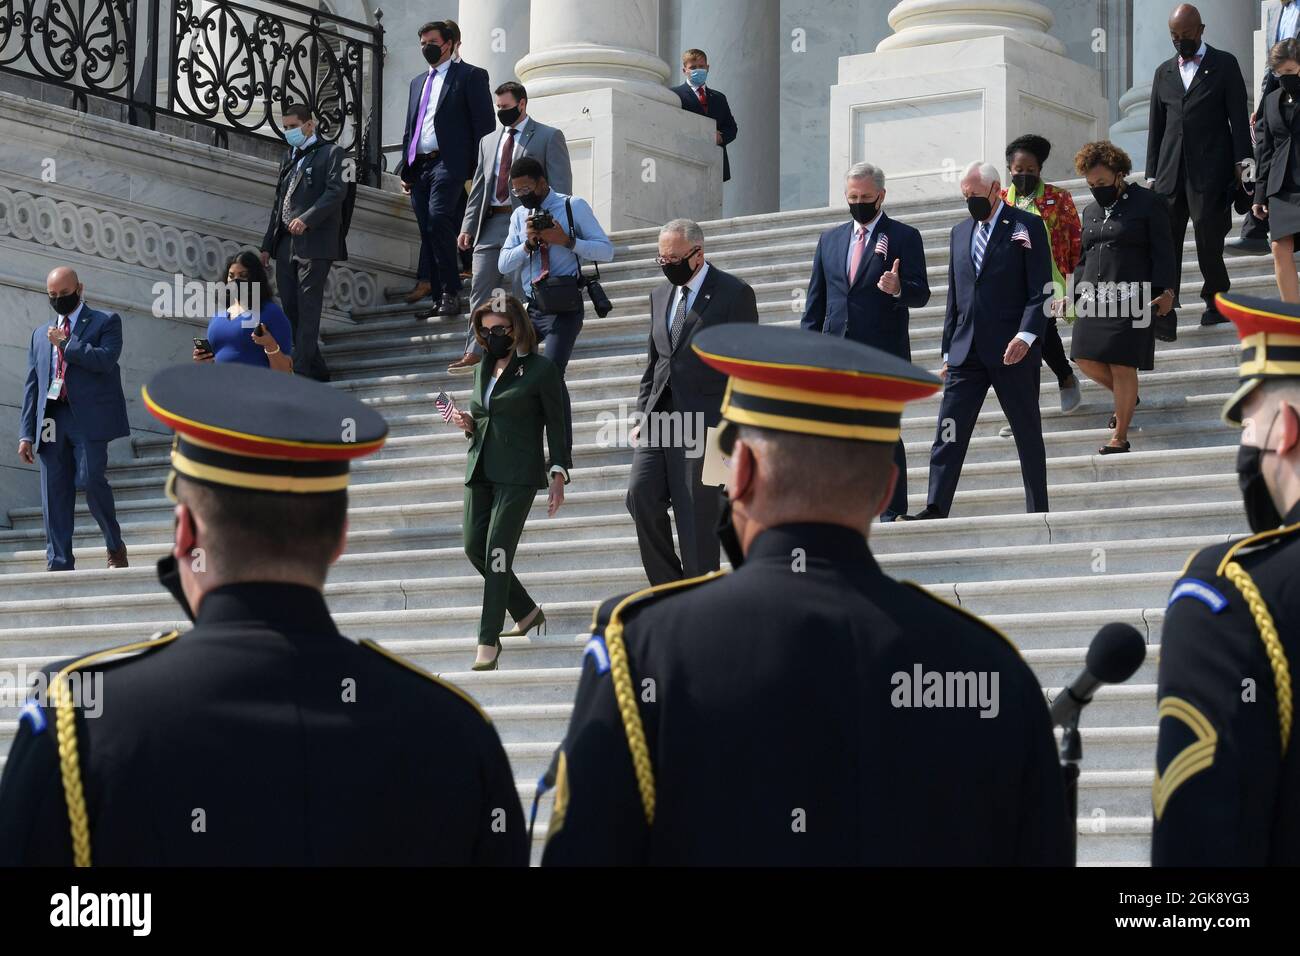 Washington, USA. 13th Sep, 2021. House Speaker Nancy Pelosi(D-CA)(first), House Republican Leader Kevin McCarthy(R-CA)(third) and Senator Chuck Schumer(D-NY)(second) with other members of Congress hold a special event about 9/11 Remembrance Ceremony, today on September 13, 2021 at East Front Center Steps/Capitol Hill in Washington DC, USA. (Photo by Lenin Nolly/Sipa USA) Credit: Sipa USA/Alamy Live News Stock Photo